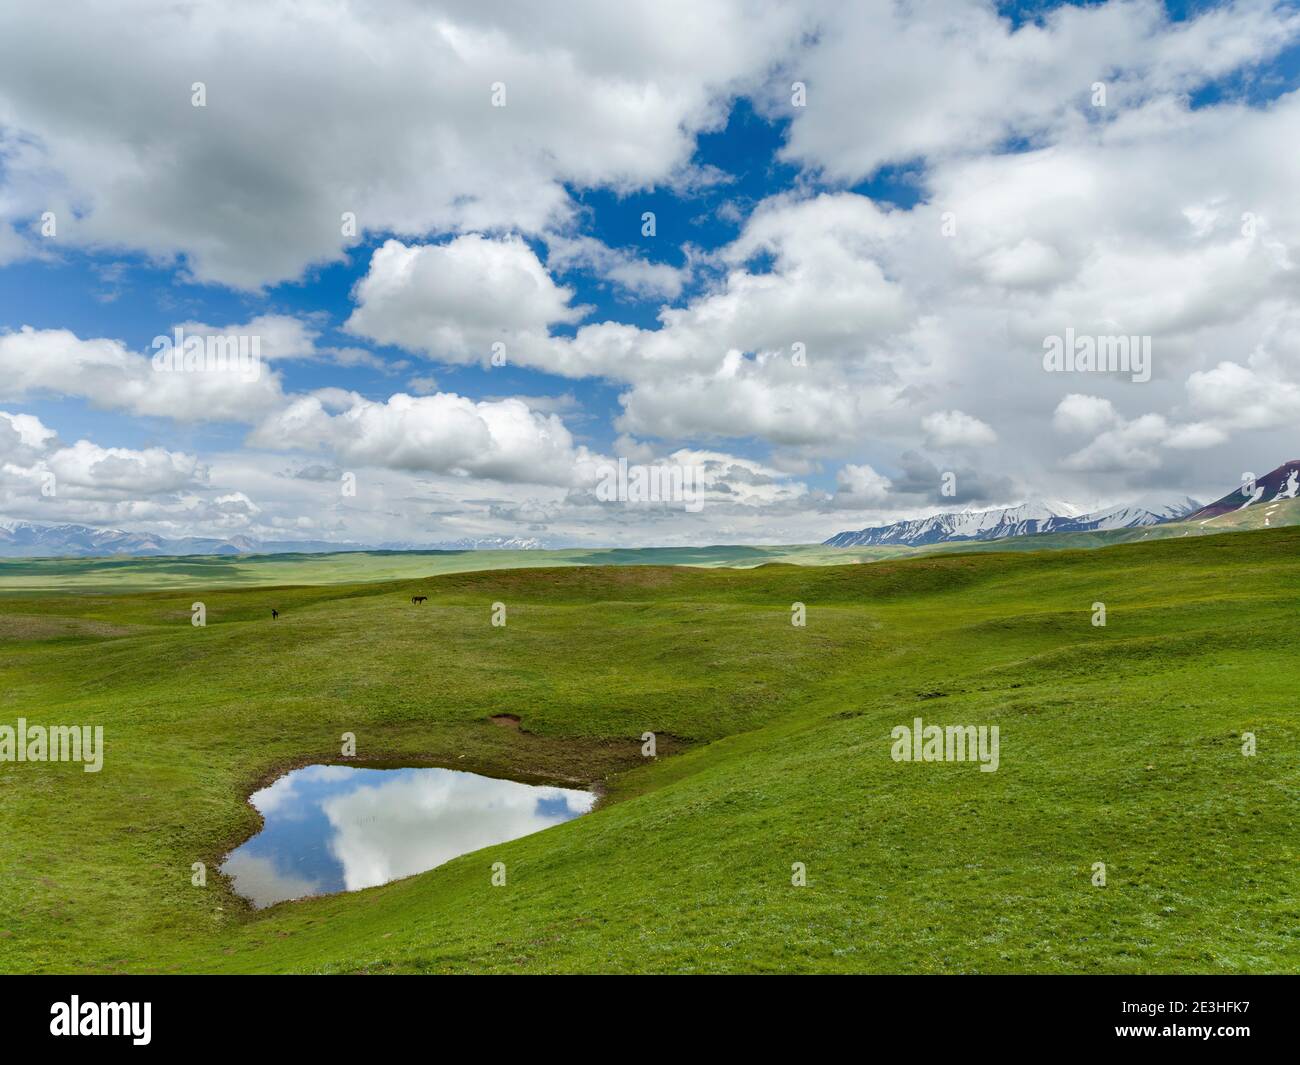 Alaj Valley in front of the Trans-Alay mountain range in the Pamir mountains. Asia, central Asia, Kyrgyzstan Stock Photo